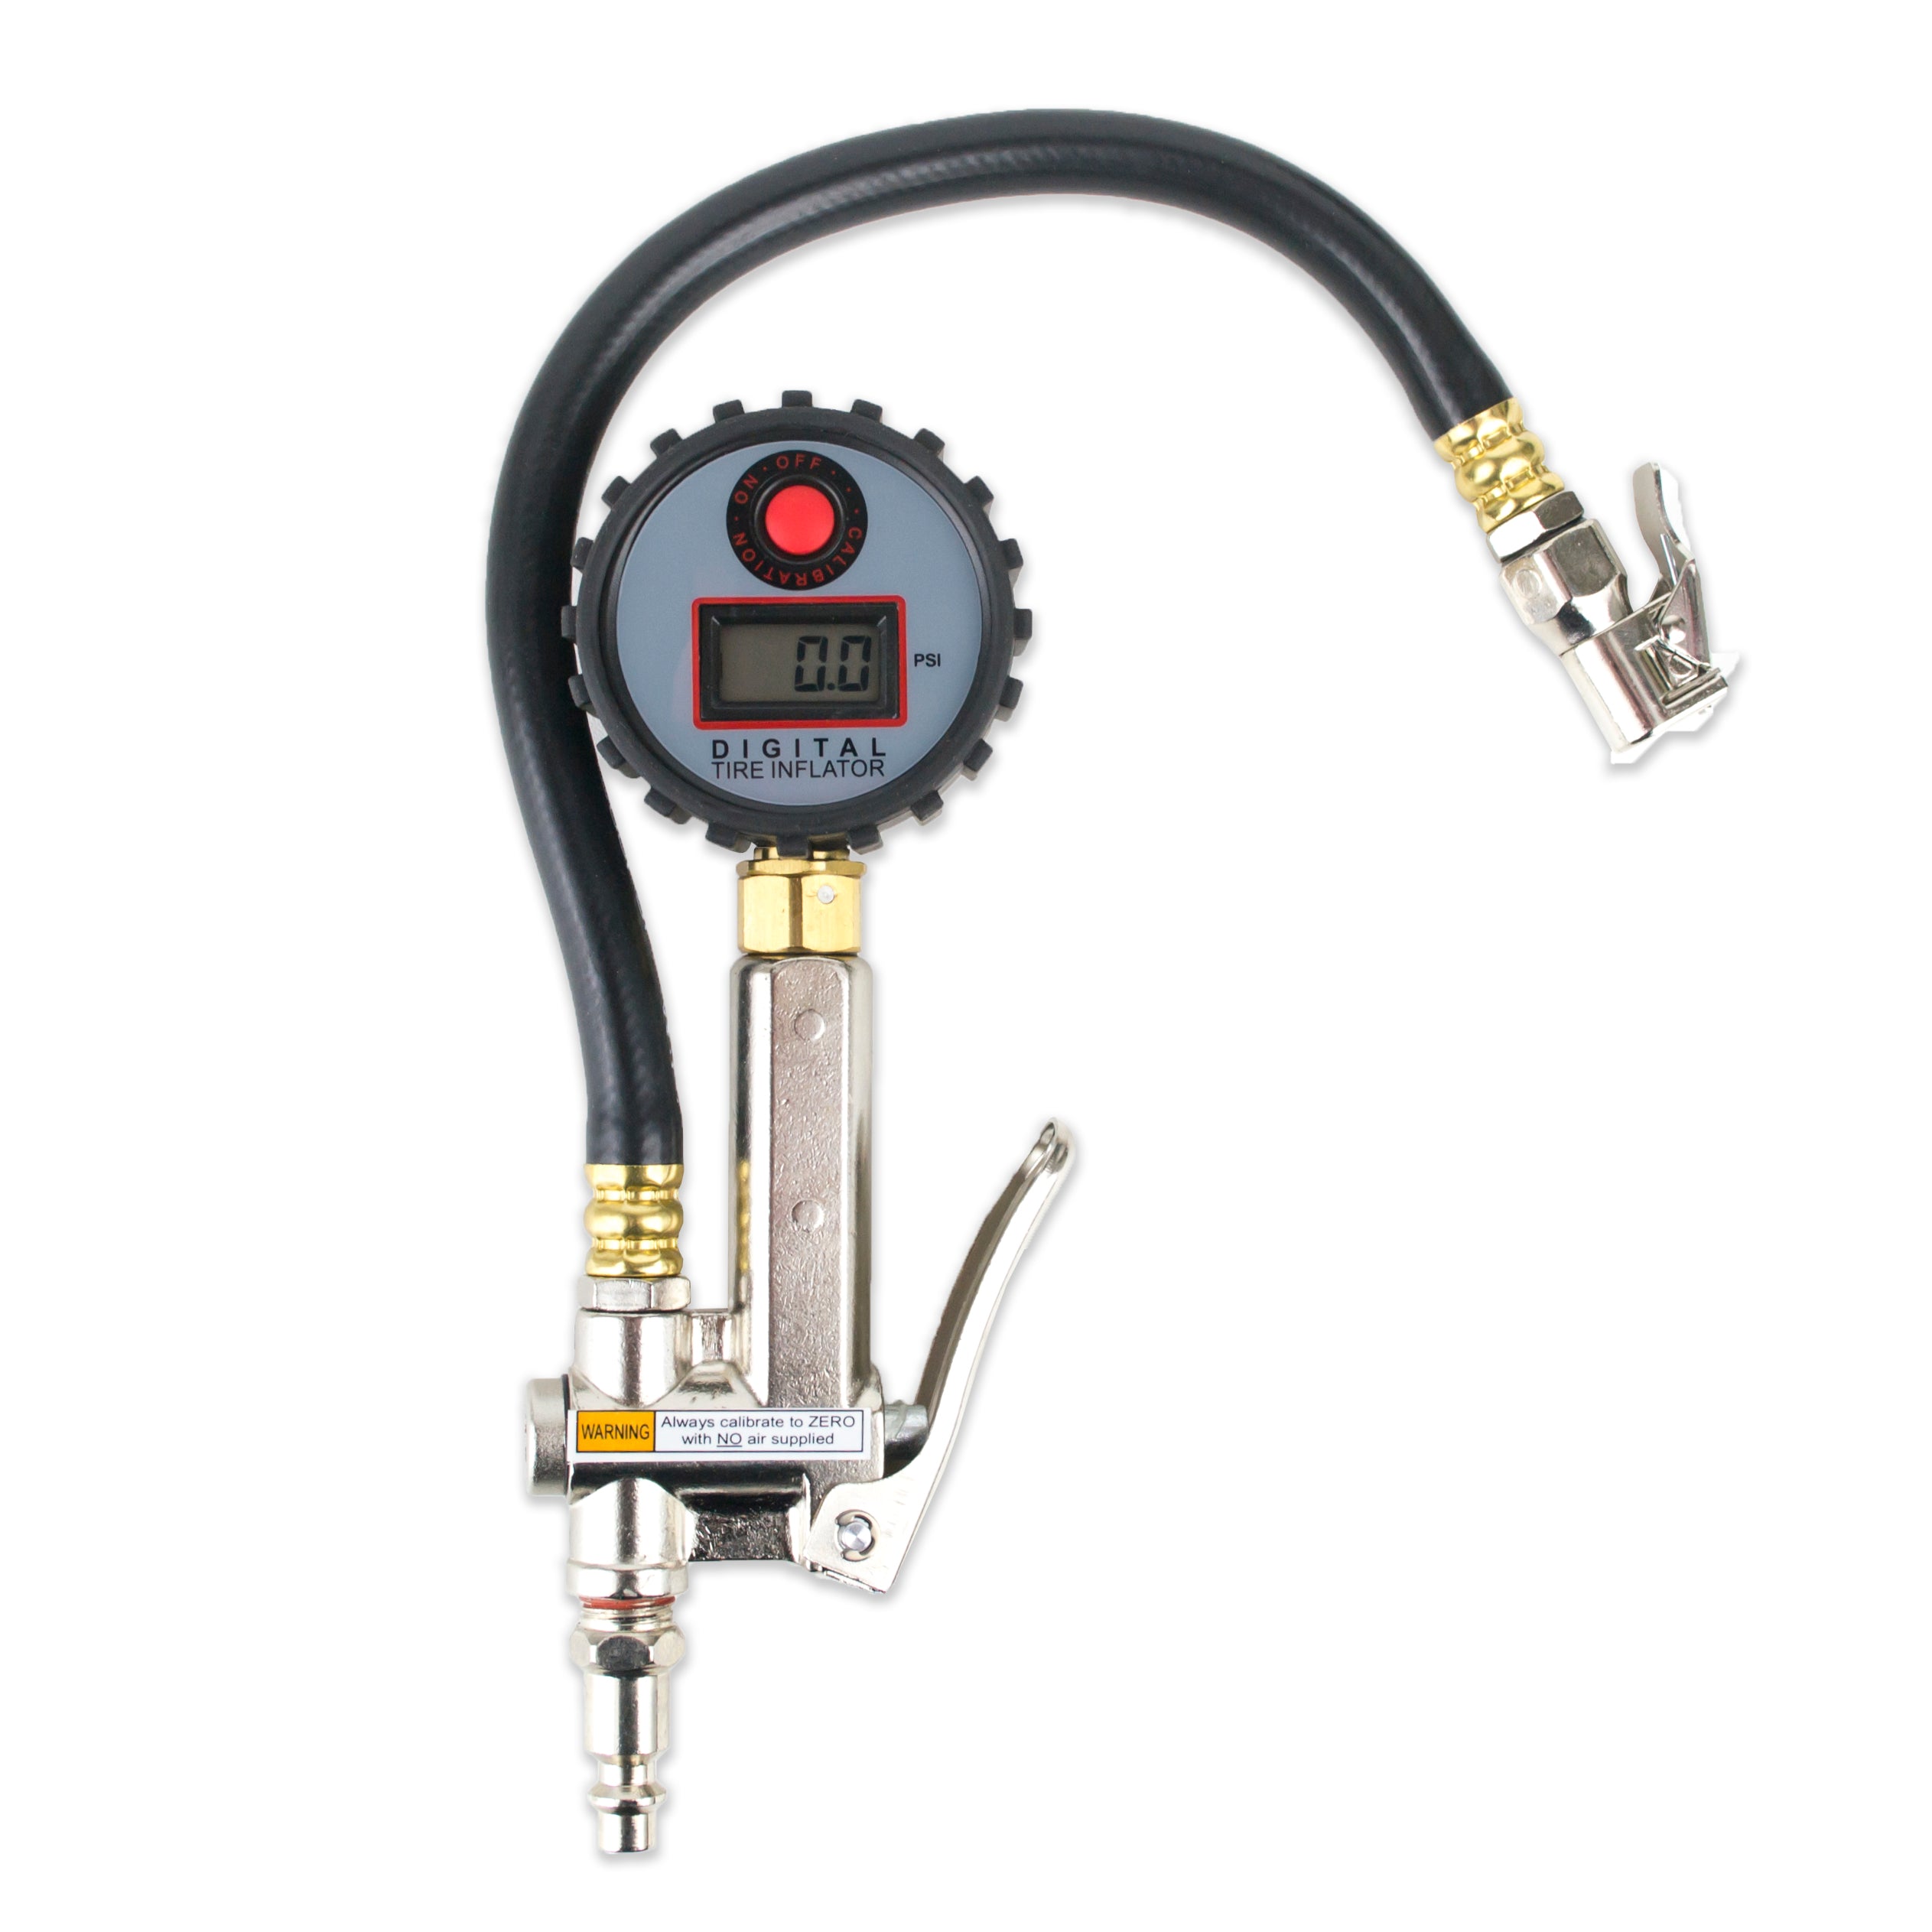 Digital Tire Inflator with Accurate LCD Gauge and Straight Clip-On Chuck